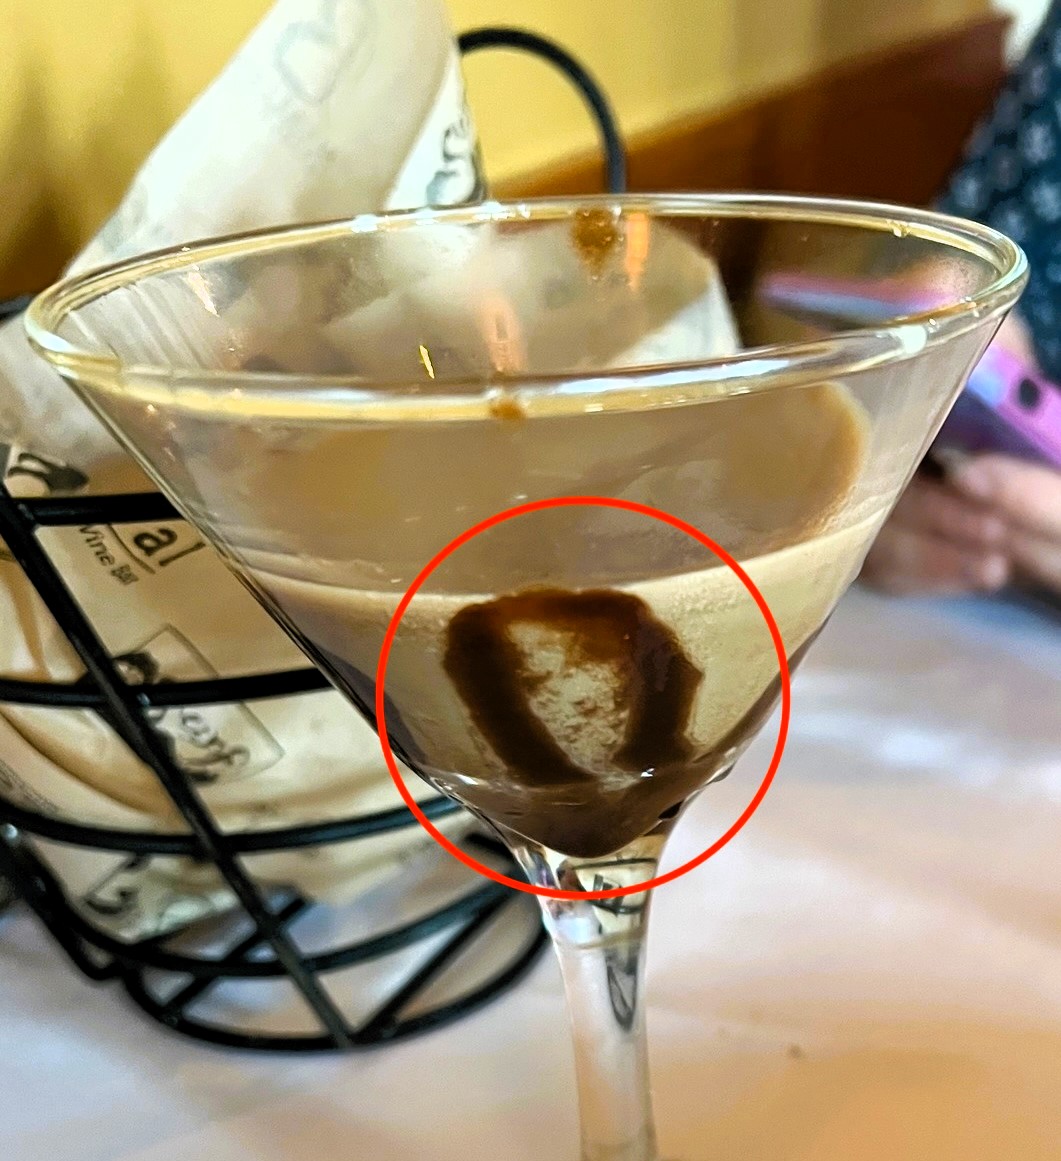 Social media comment on the post of Dinner took an unexpected turn when a chocolate martini revealed a familiar face. Find out whose iconic visage was spotted in the swirls of chocolate.